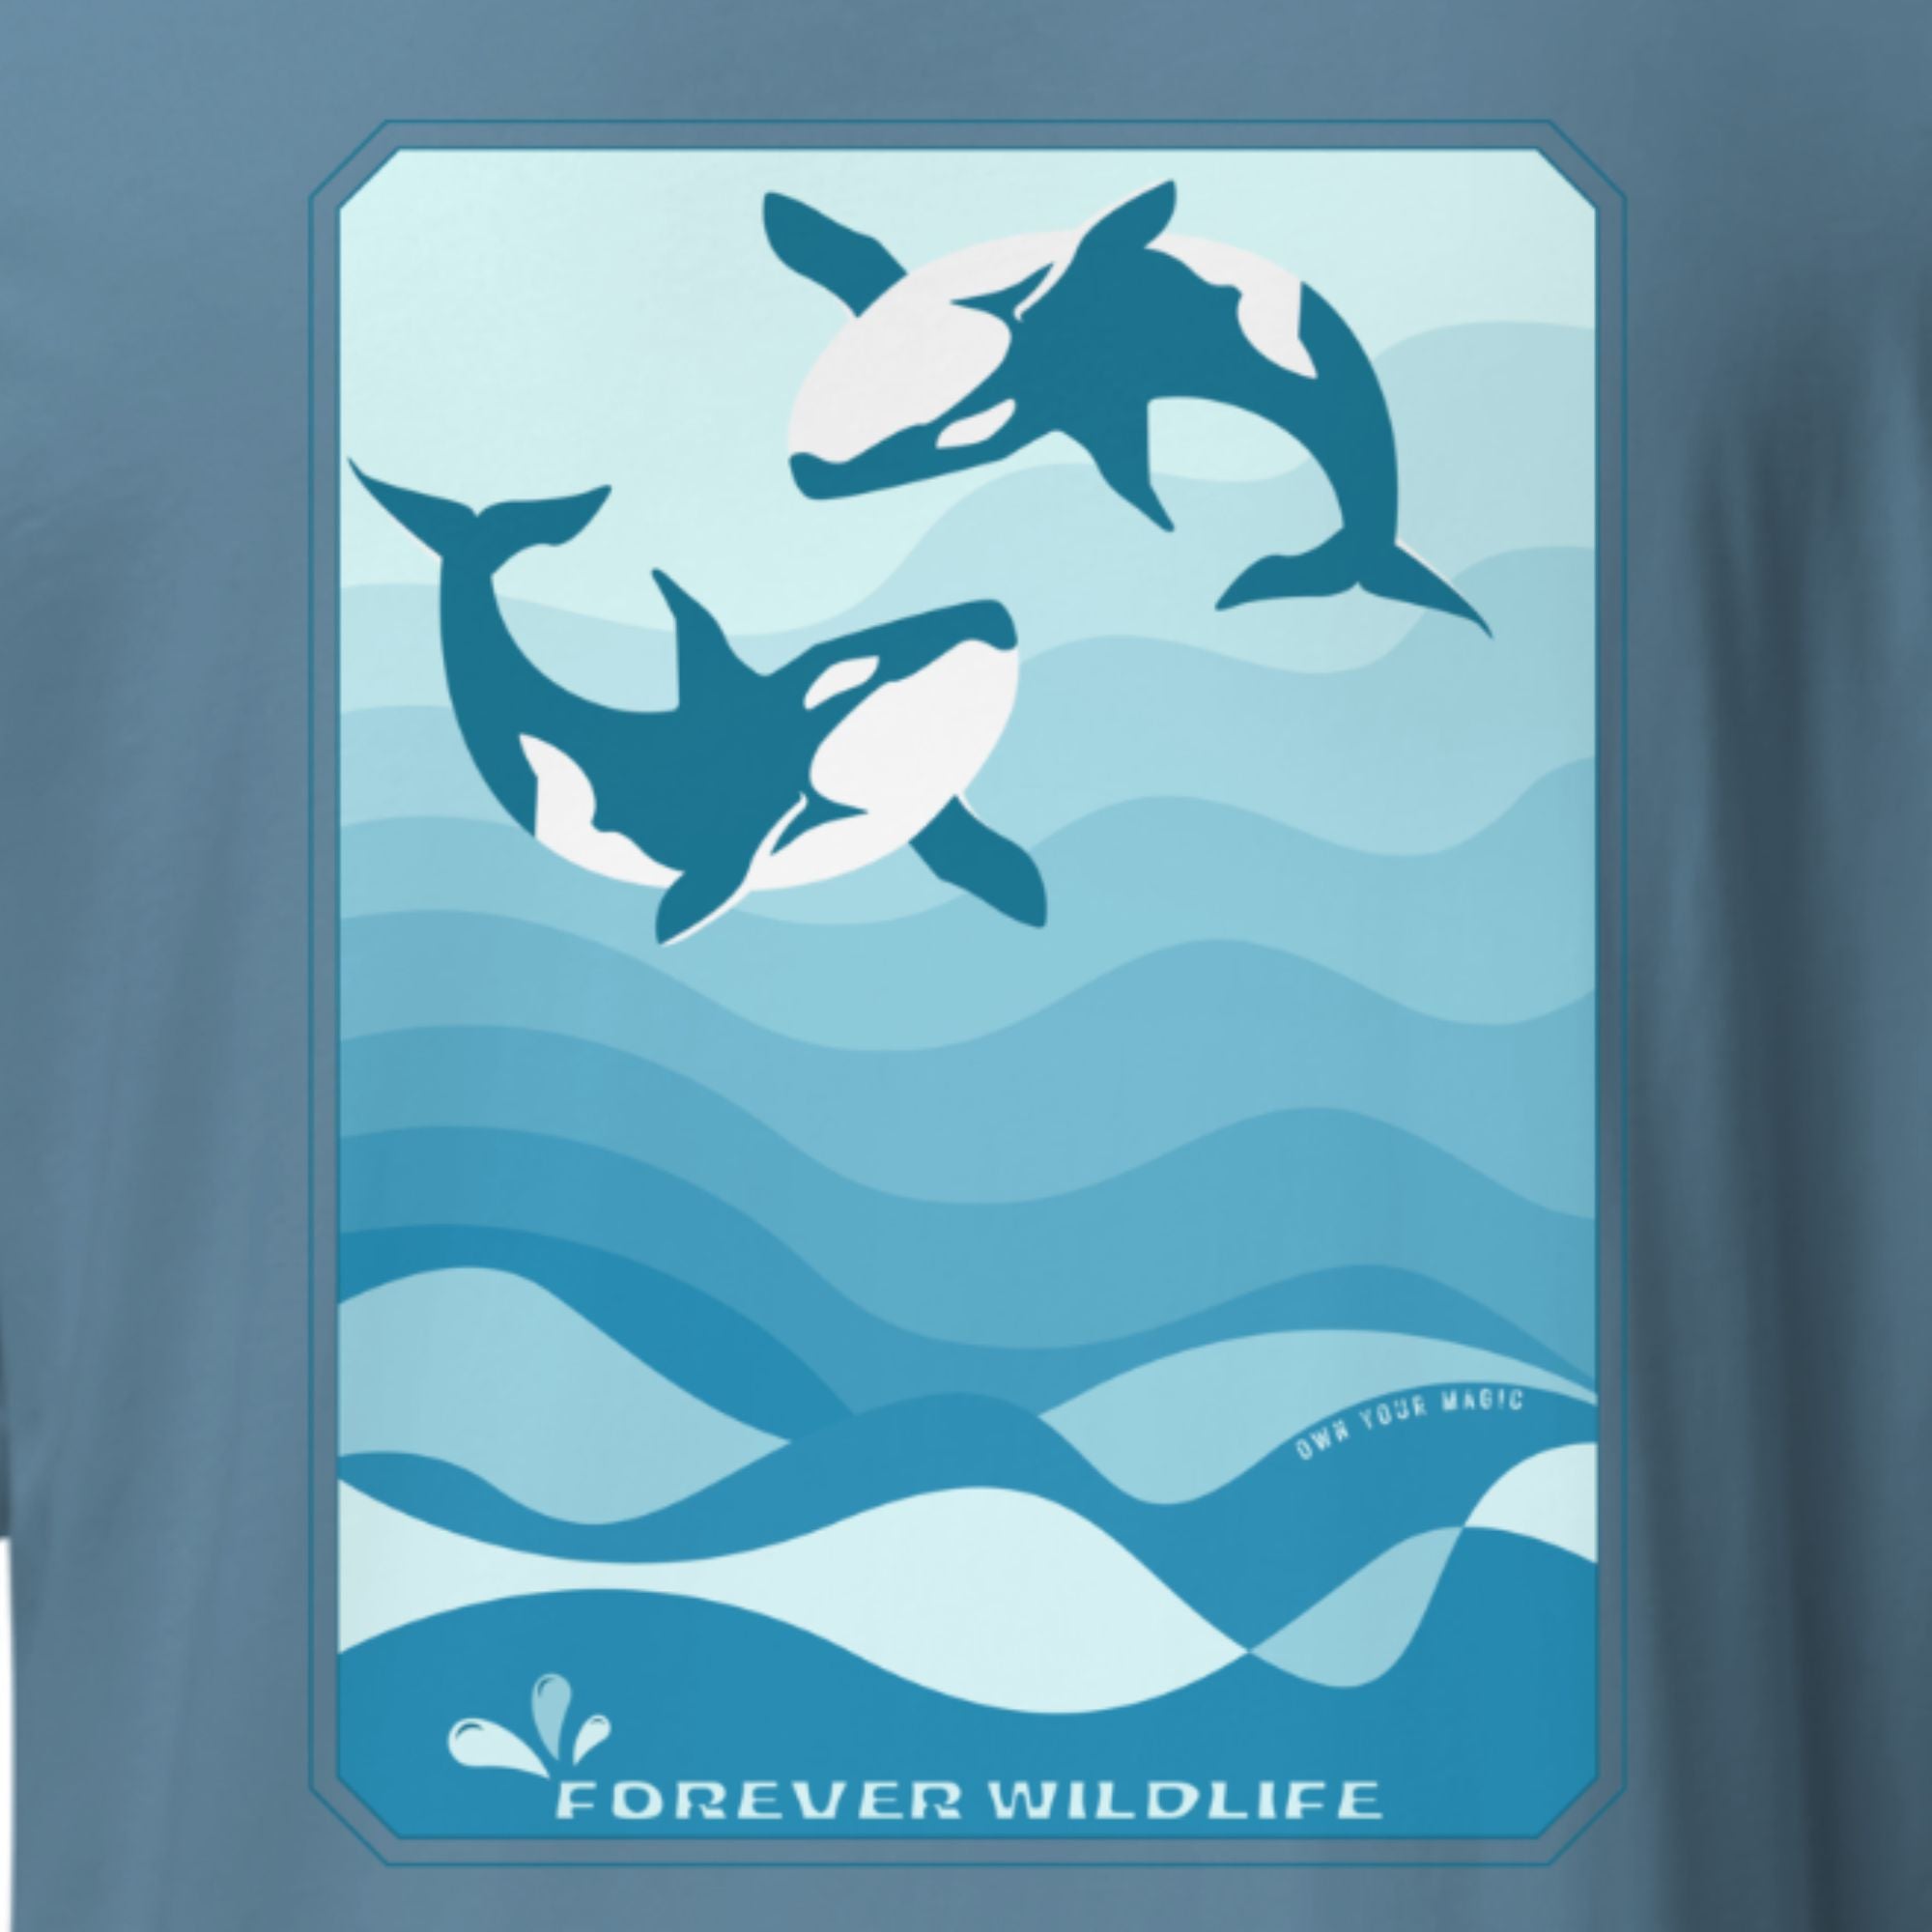 Orca Shirt, beautiful Steel Blue Orca T-Shirt with Killer Whales on the shirt by Forever Wildlife selling Wildlife T Shirts.